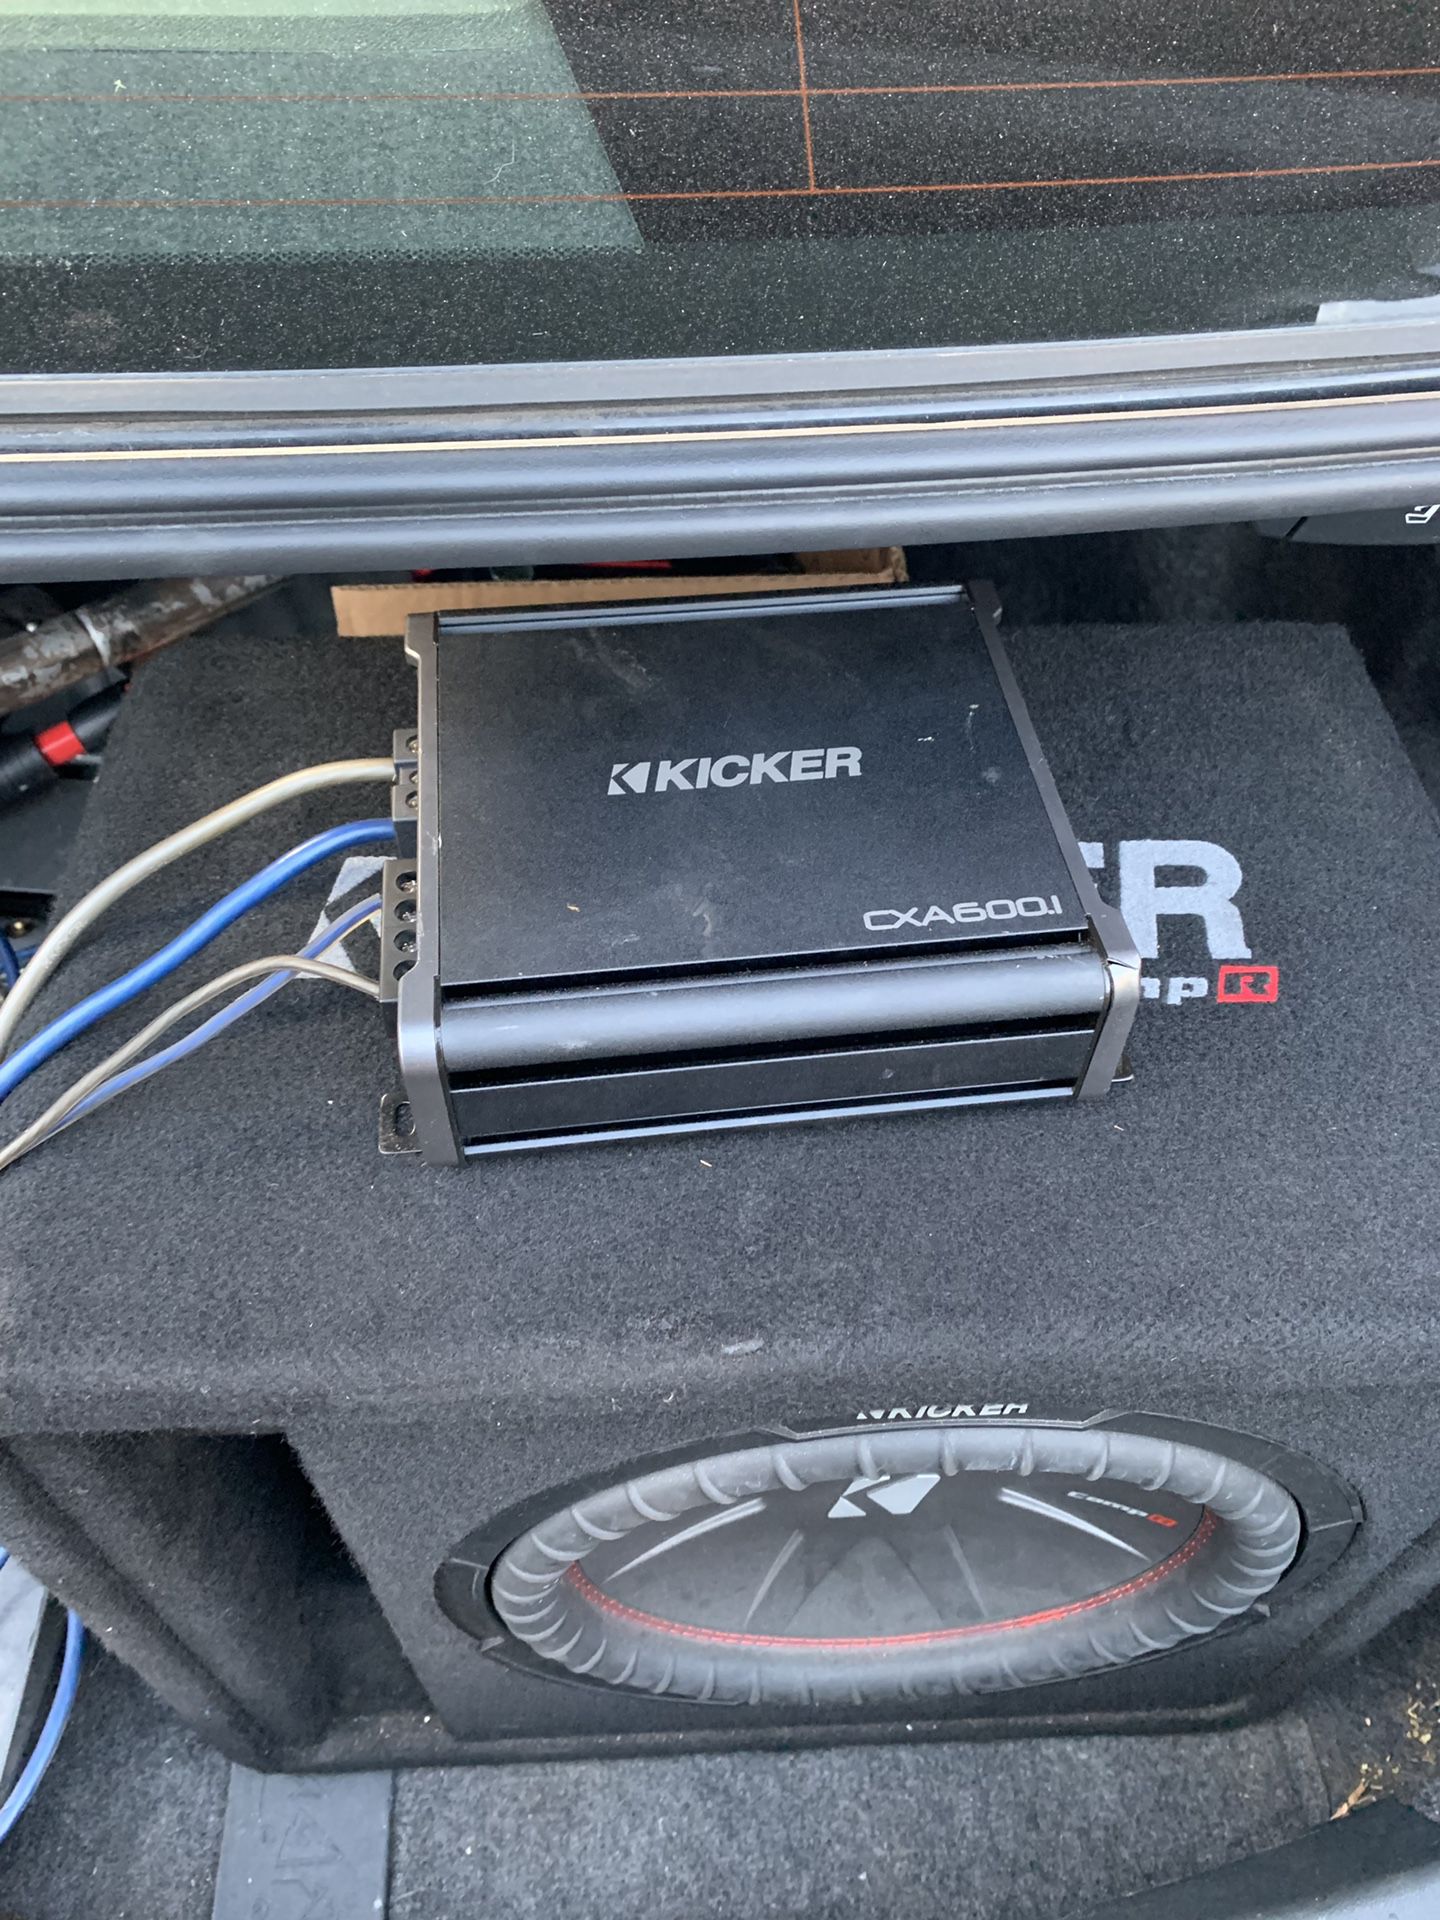 Kicker sub and amp with wires